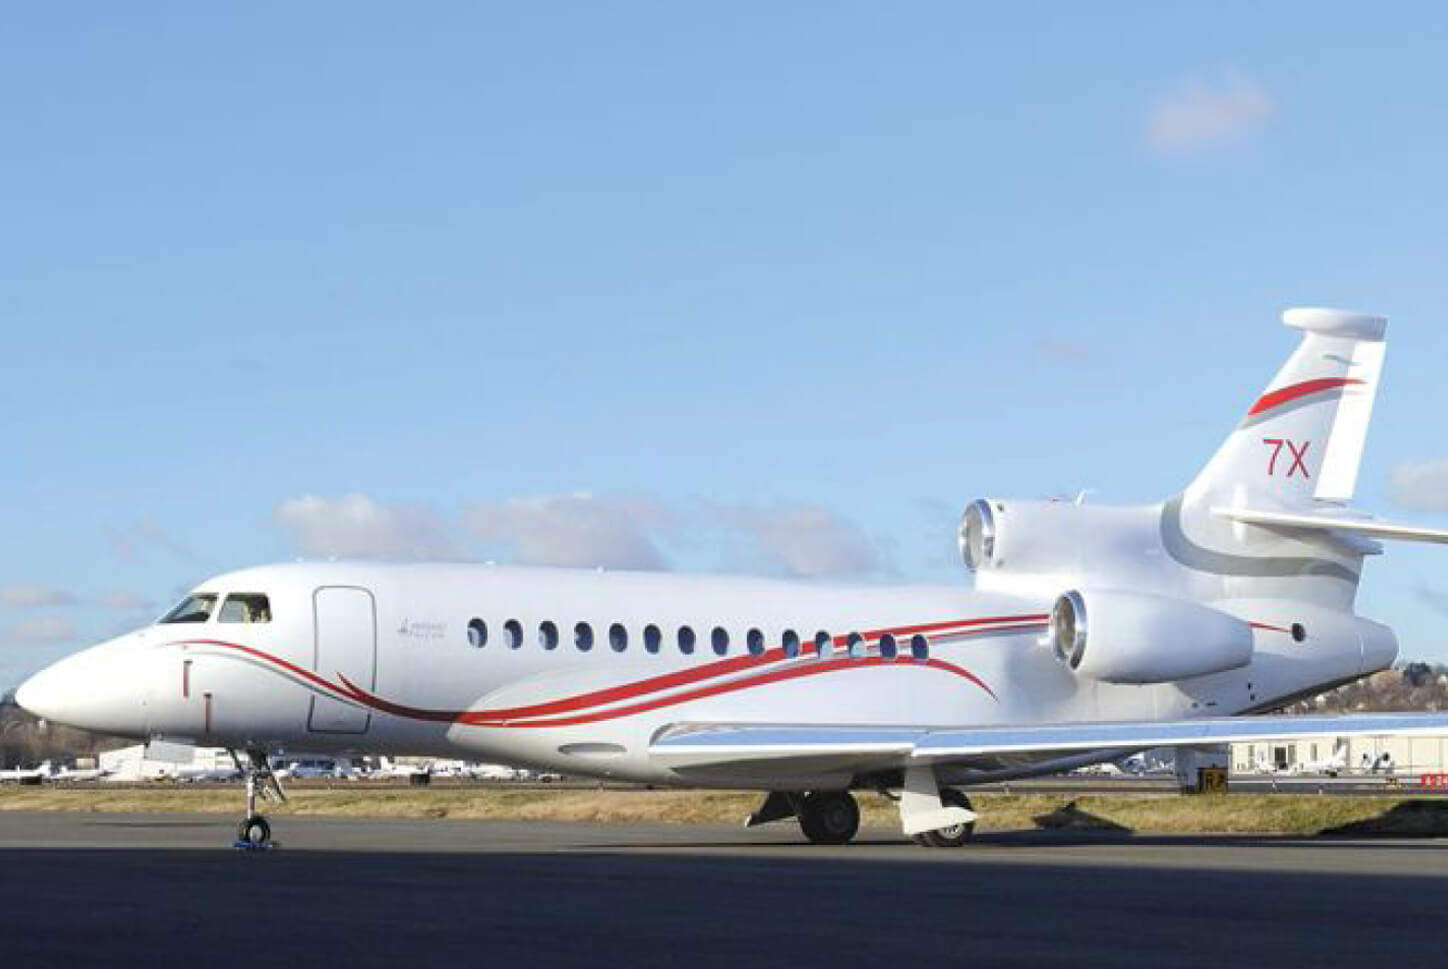 Falcon 7X SN048 Model in White on Runway Shot From Side